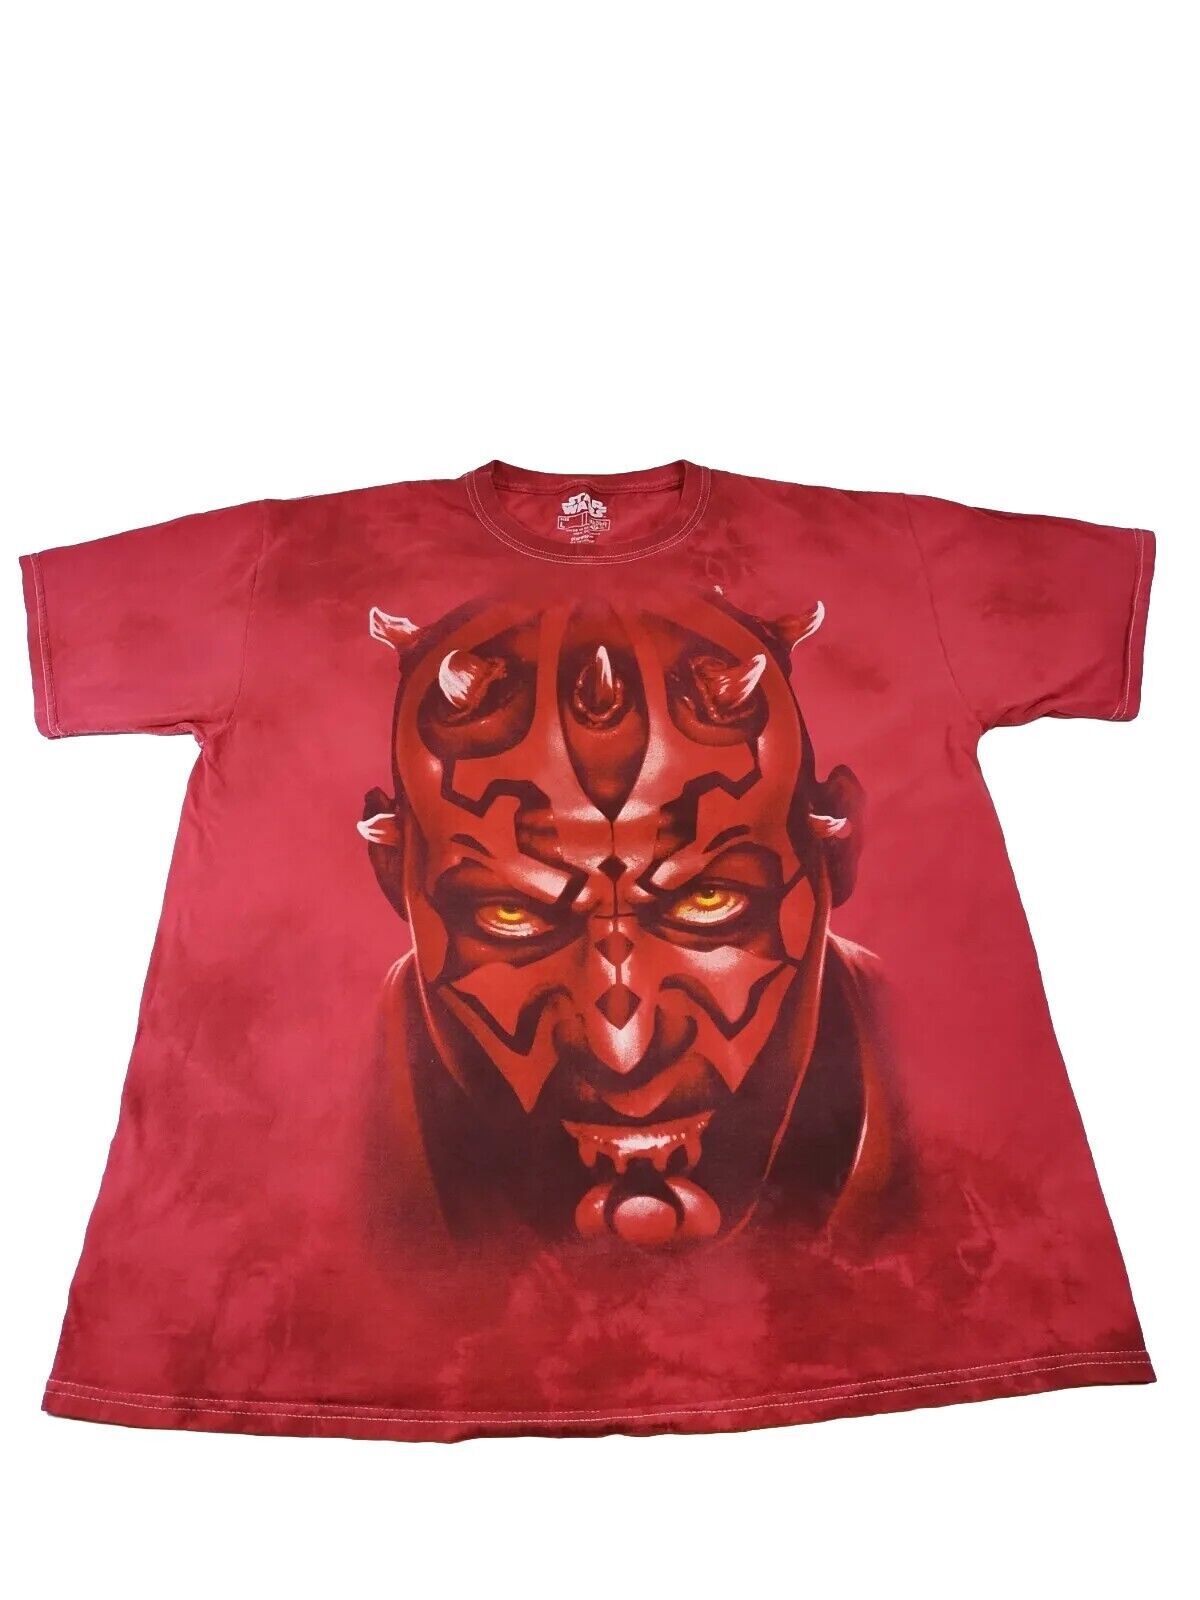 Star Wars T-shirt Darth Maul Mens Size Large Tie Dye Fire Red 